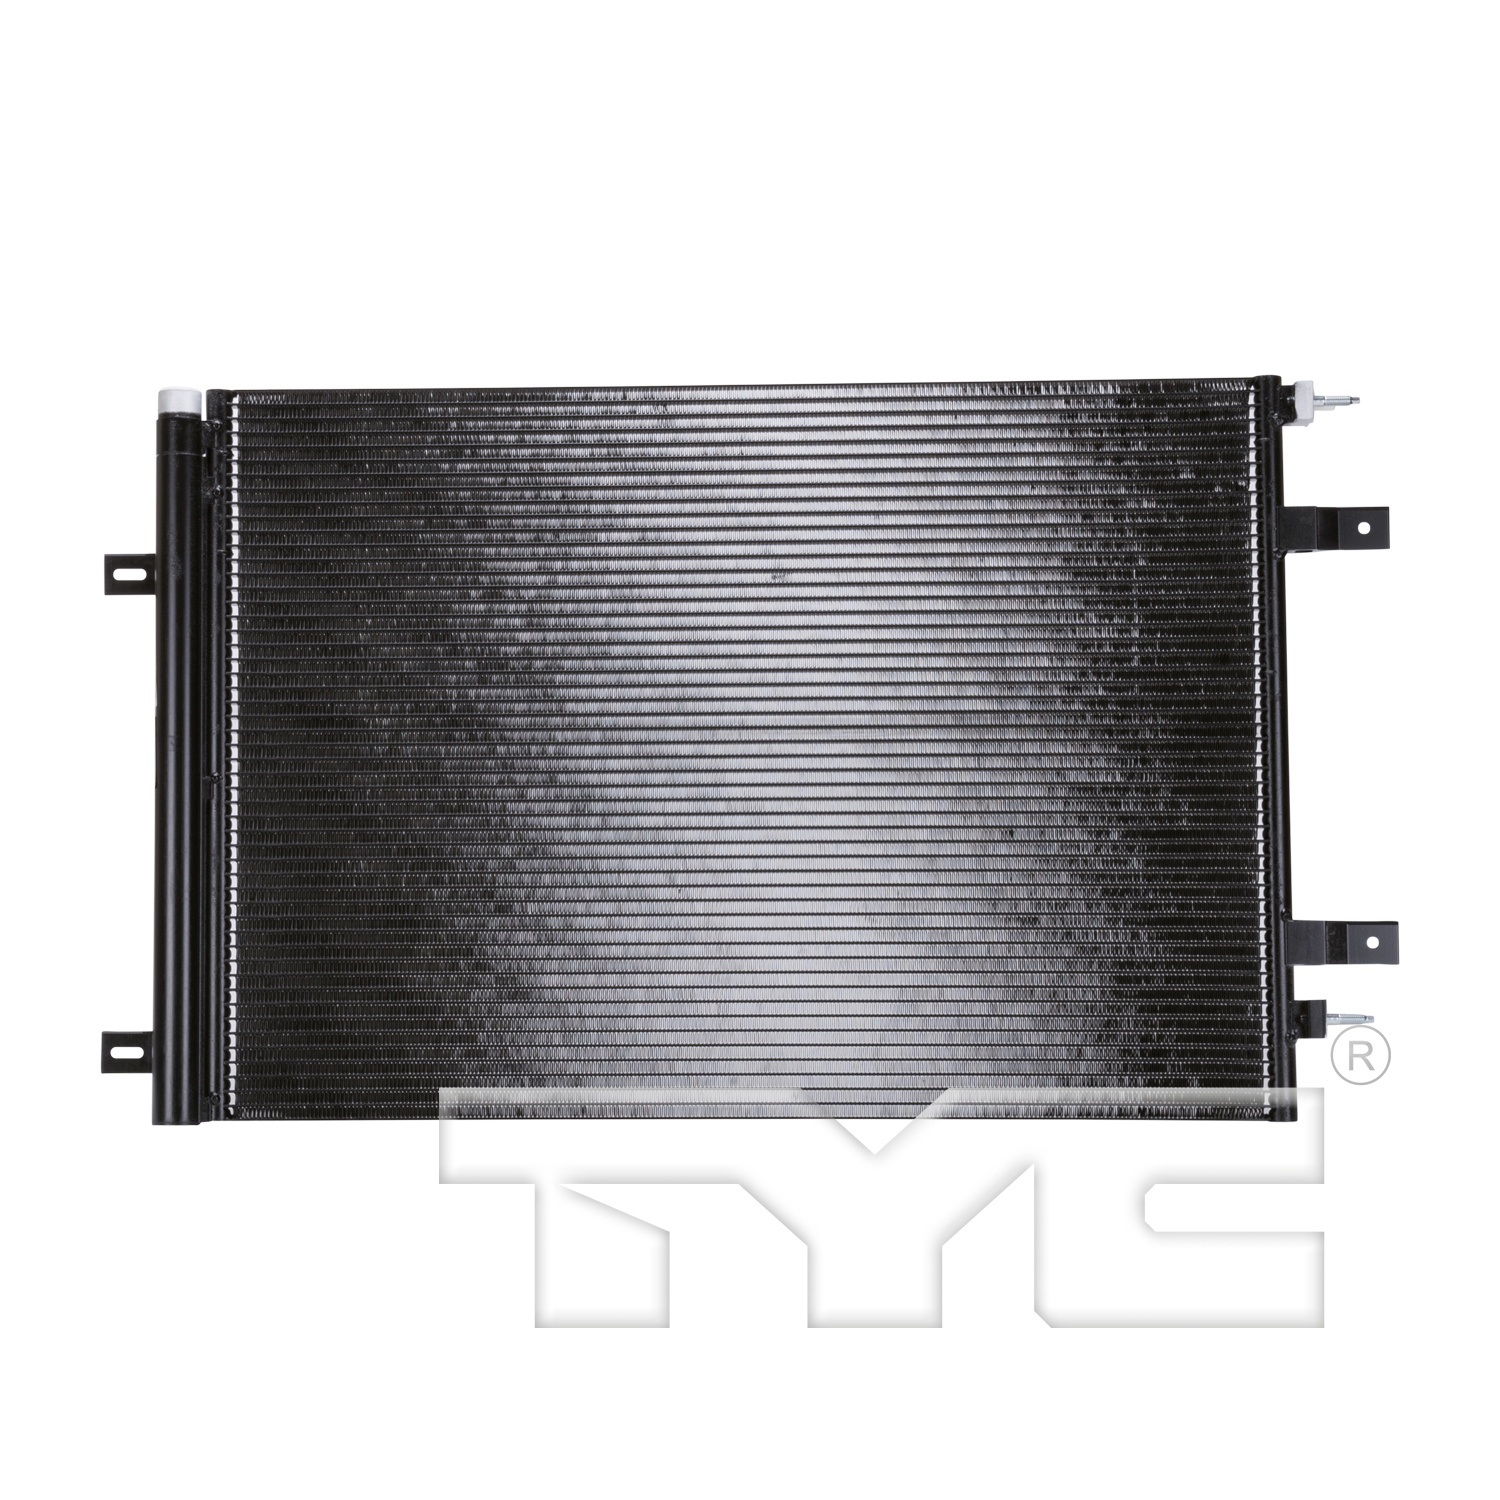 Aftermarket AC CONDENSERS for FORD - F-350 SUPER DUTY, F-350 SUPER DUTY,11-16,Air conditioning condenser